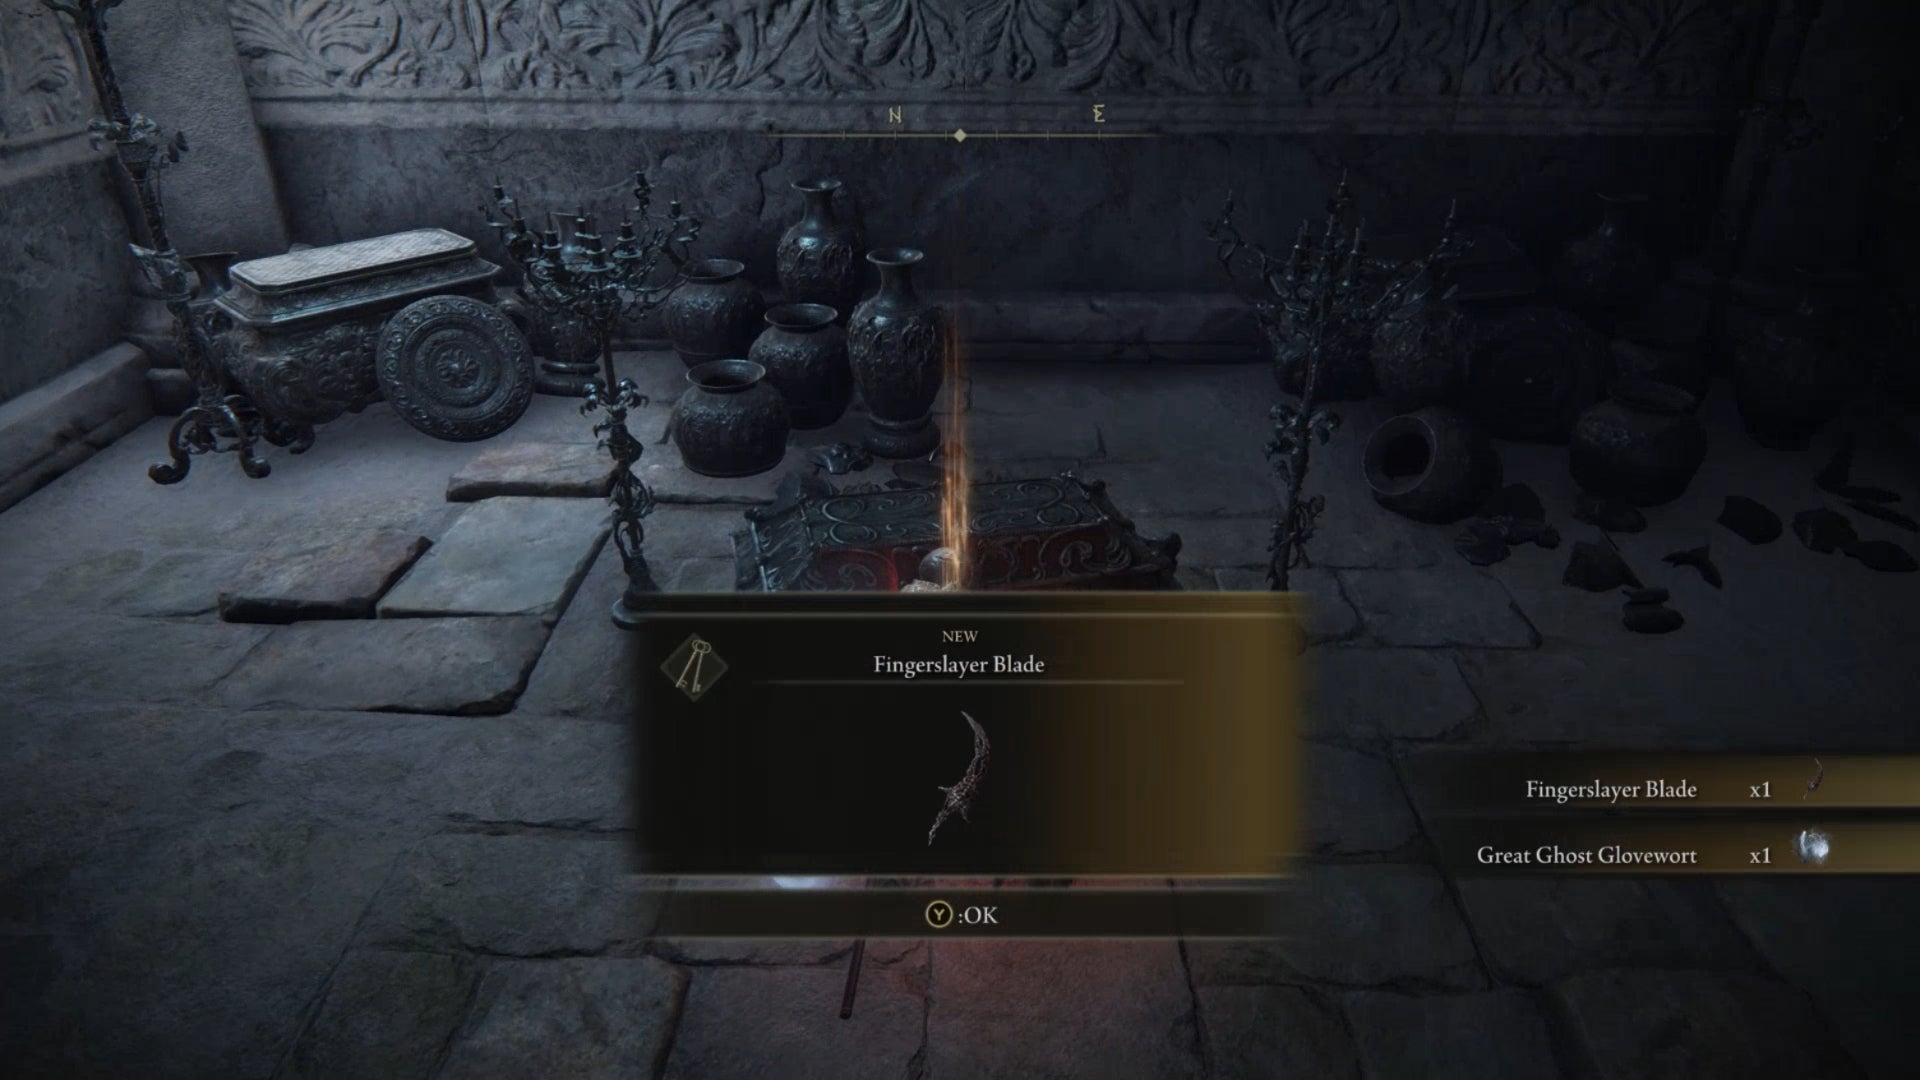 The player obtains the Fingerslayer Blade from a chest in Elden Ring.